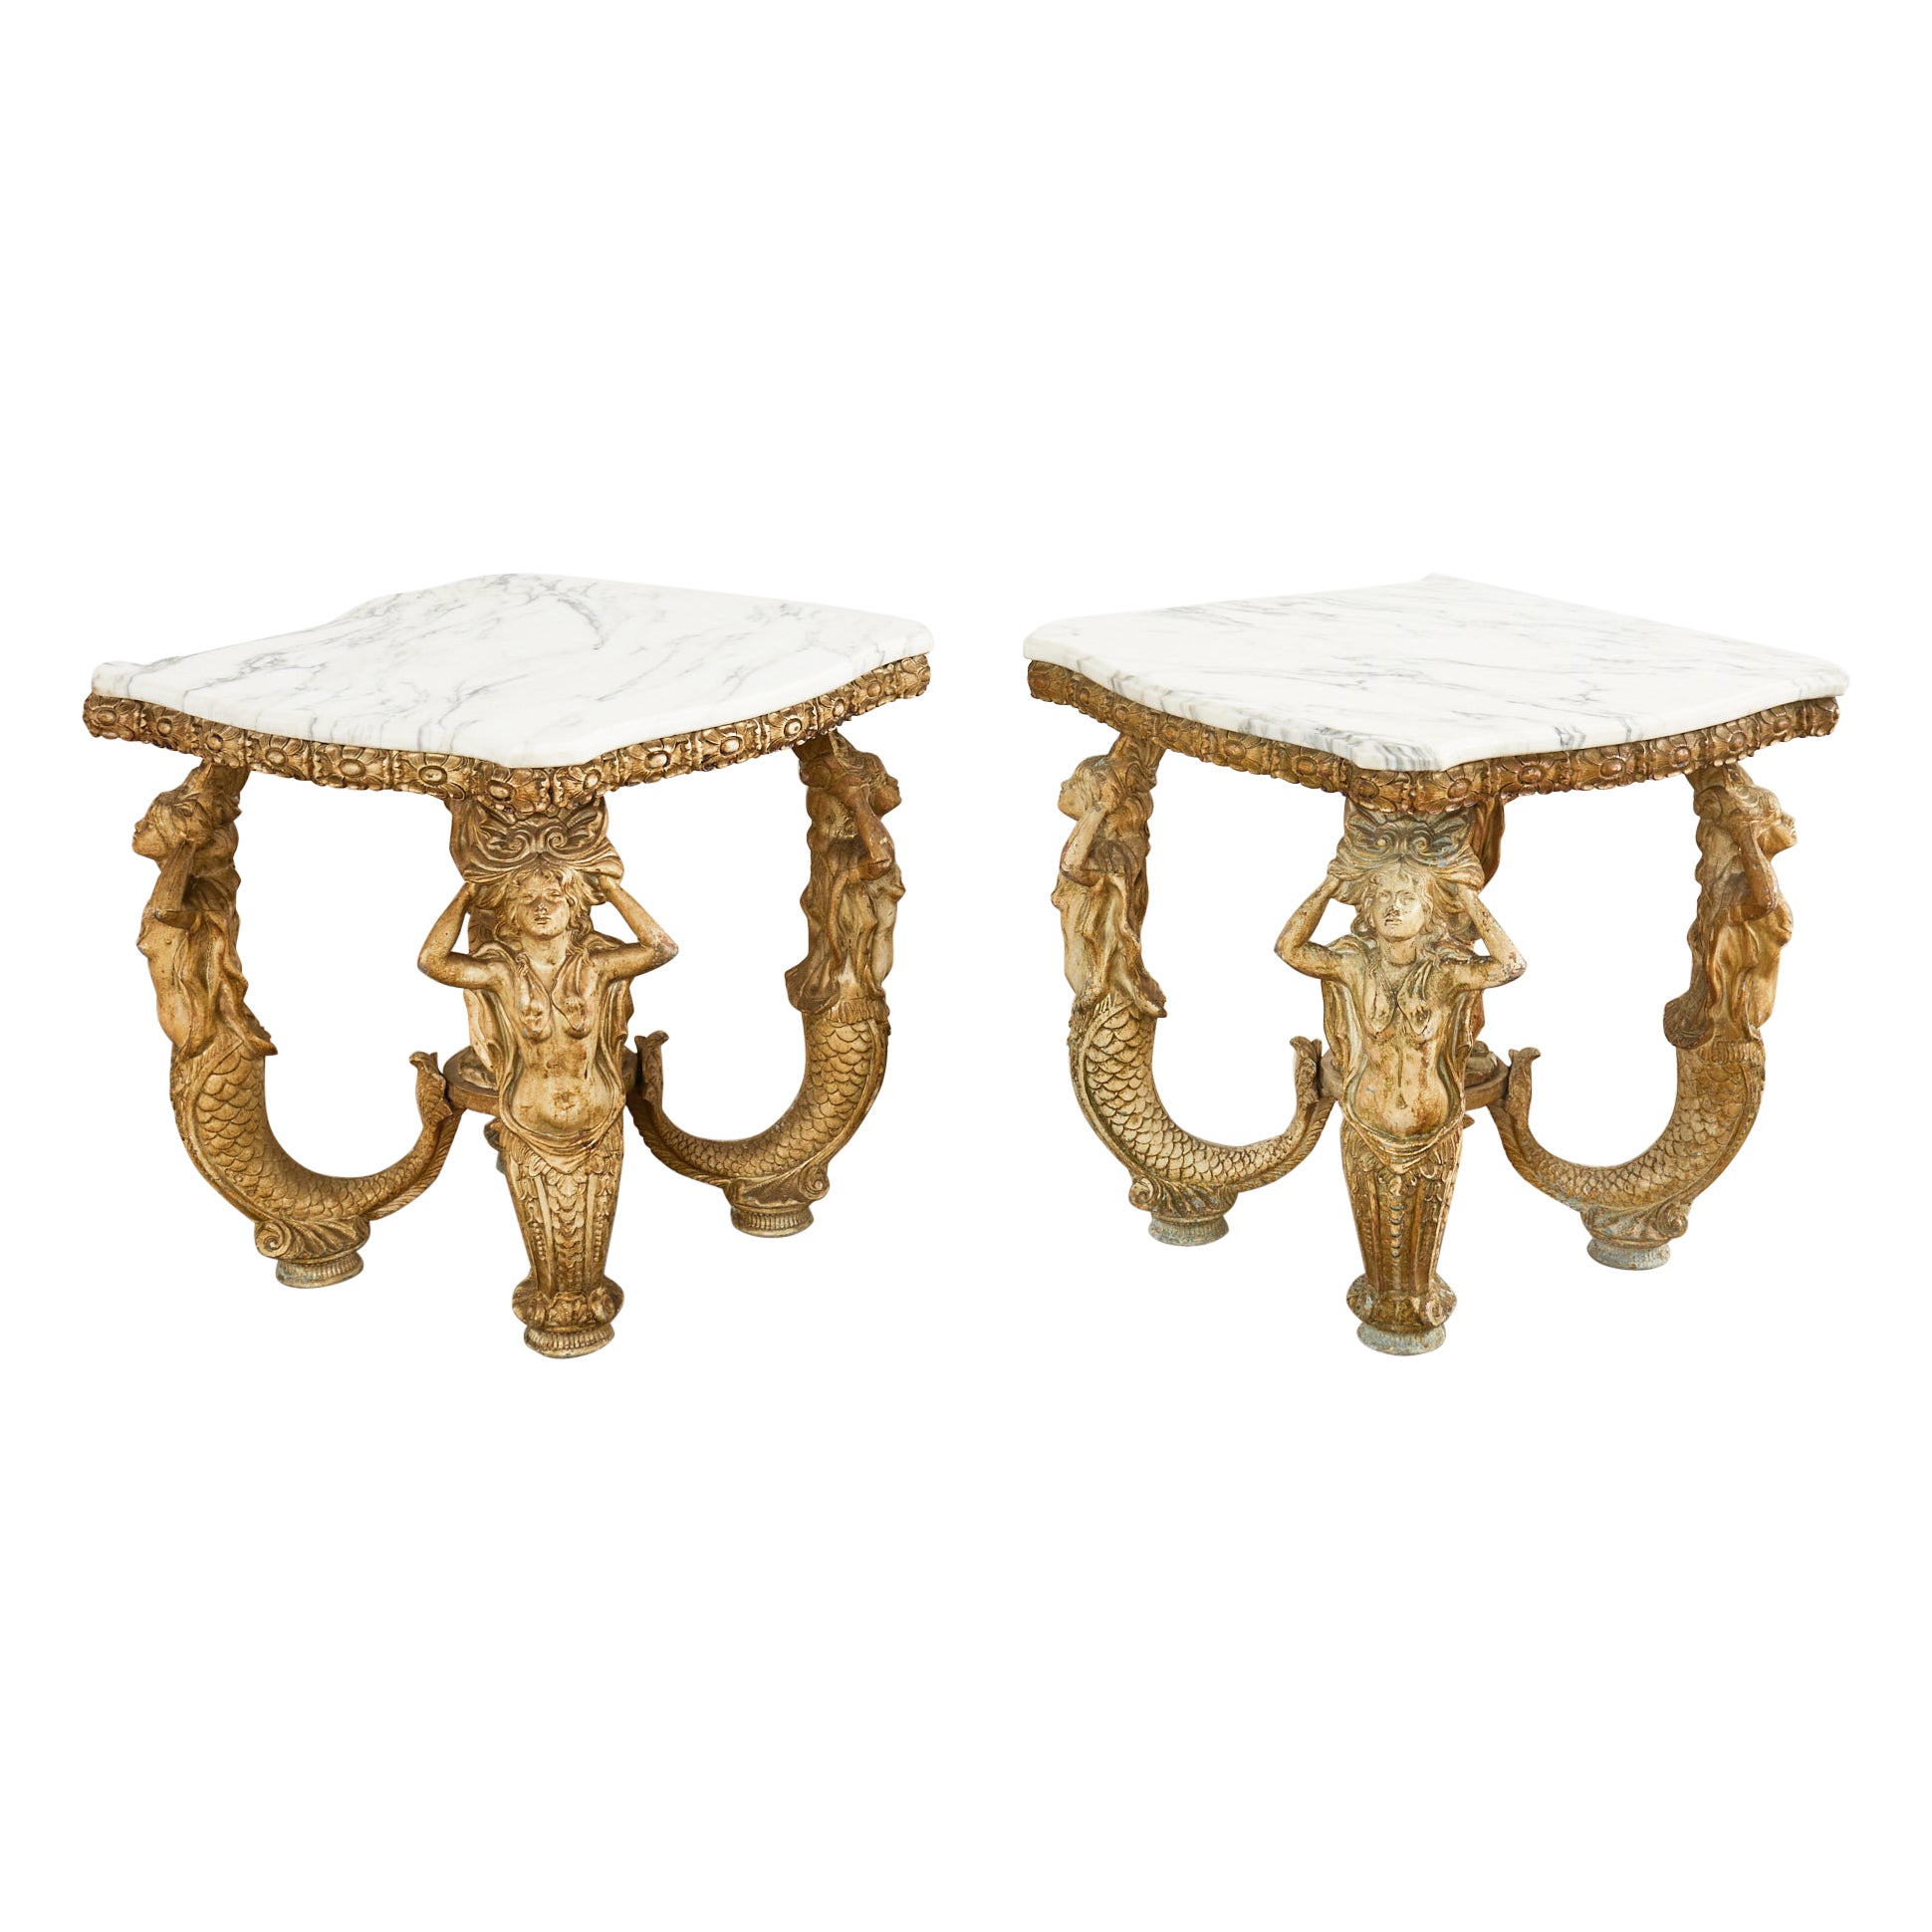 Pair of Venetian Grotto Style Marble Top Tables with Mermaids